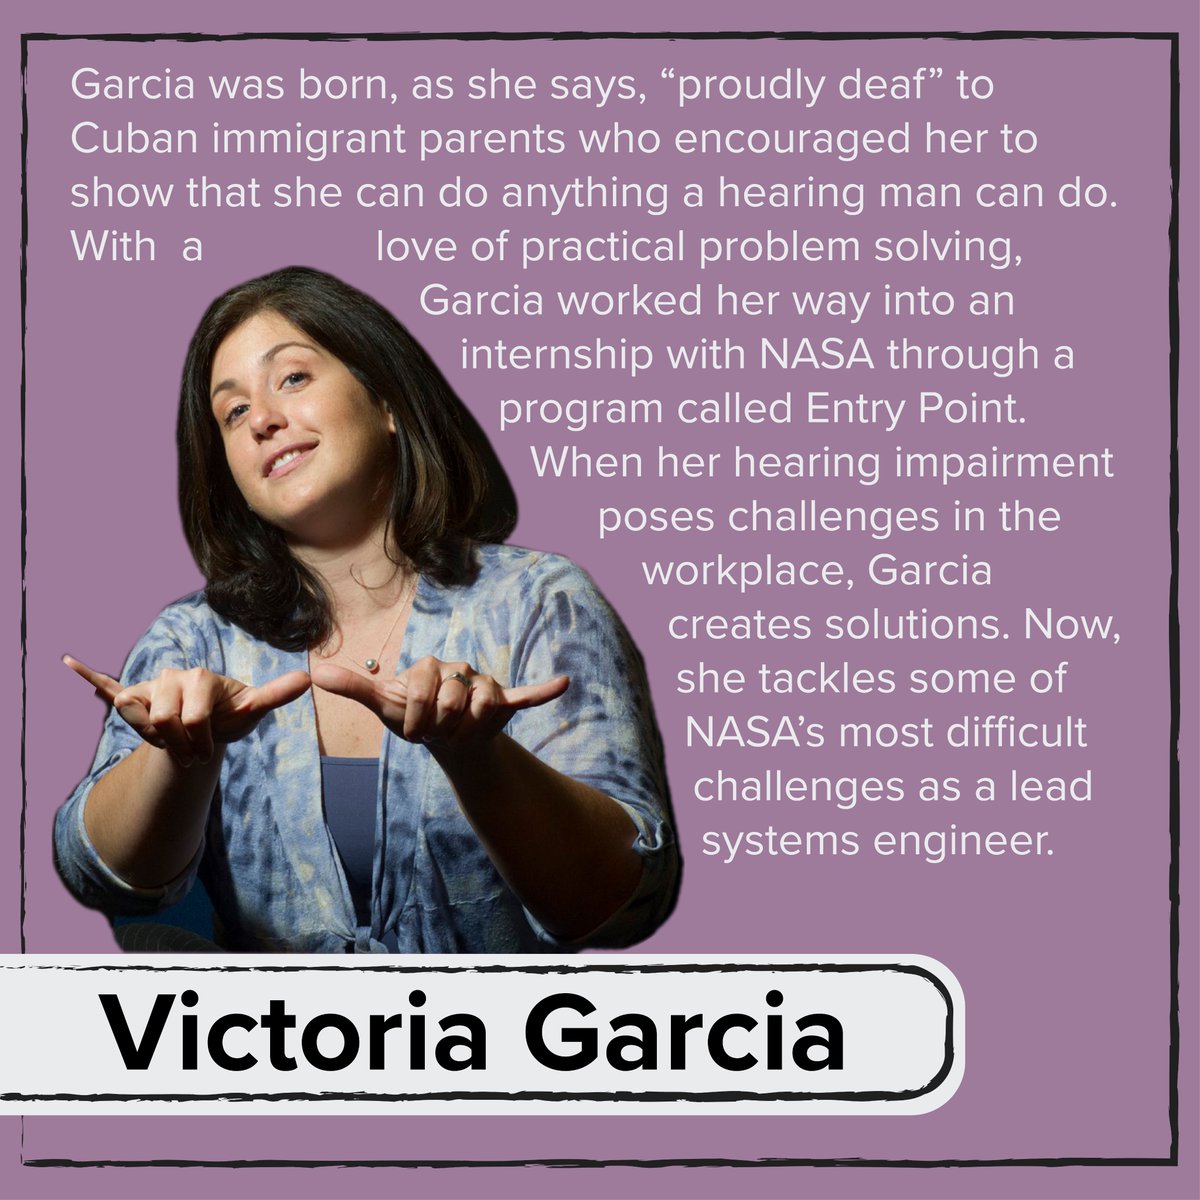 Victoria Garcia is a "proudly deaf" lead systems engineer  @NASA_Marshall who helps solve complex problems for  @NASA_SLS. Although her hearing impairment has caused challenges in her life, Garcia overcomes barriers to prove that she is capable of everything a hearing man can do.